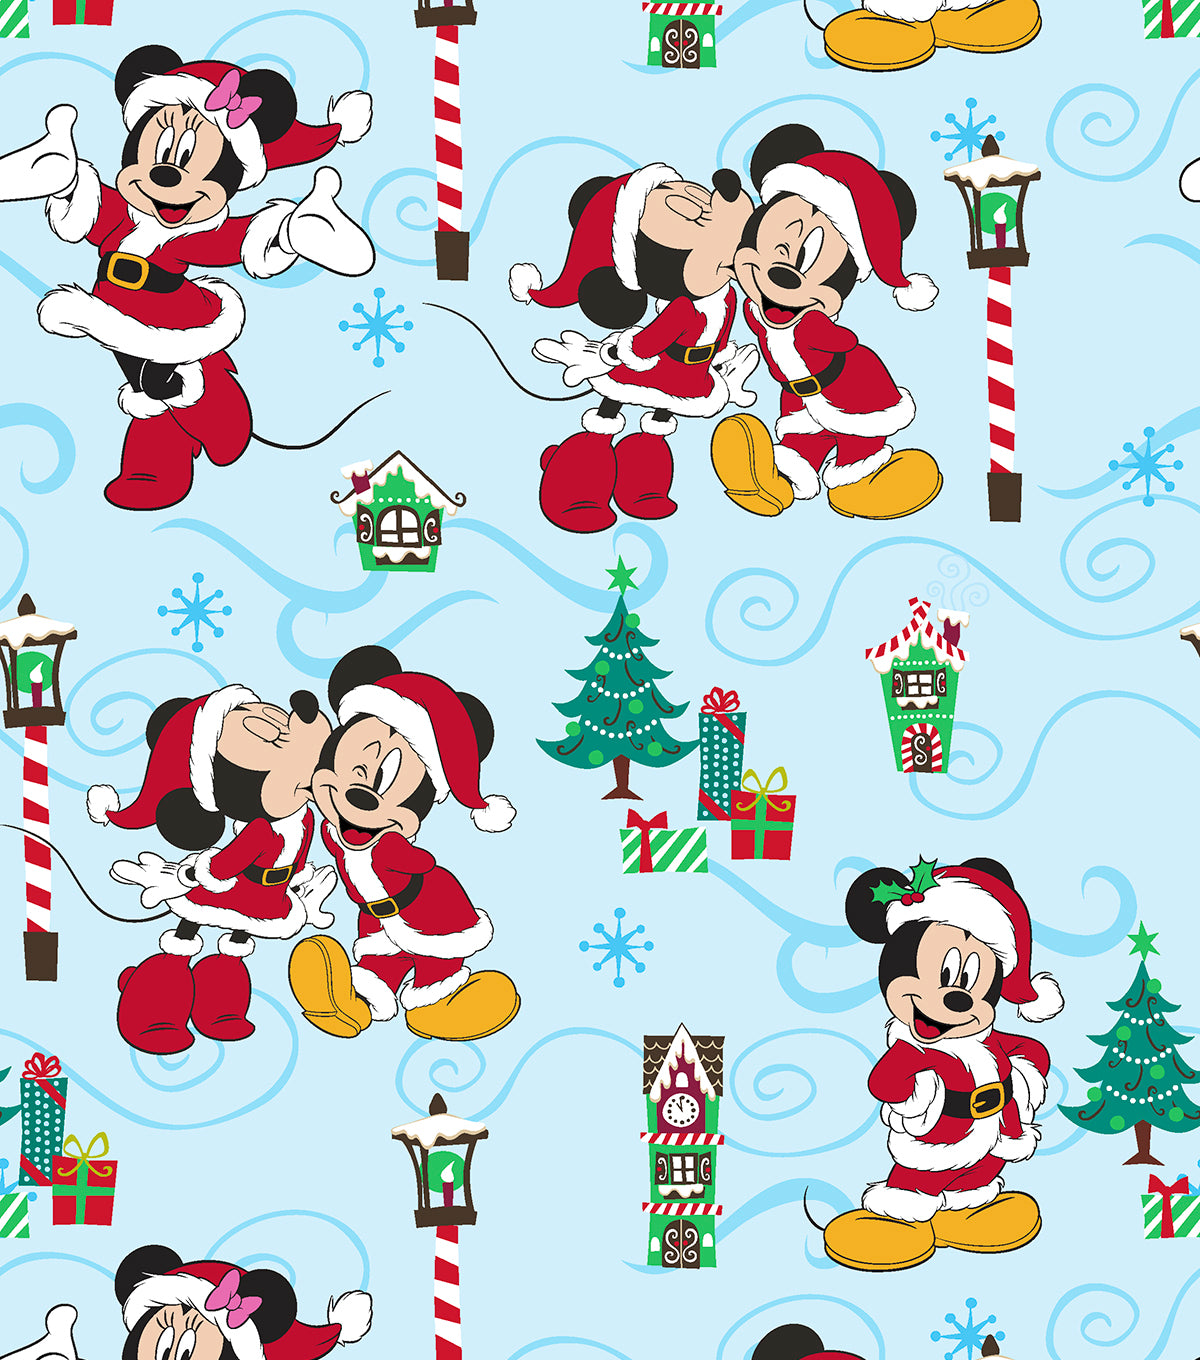 Disney Mickey Mouse & Minnie Mouse Christmas Love Fabric